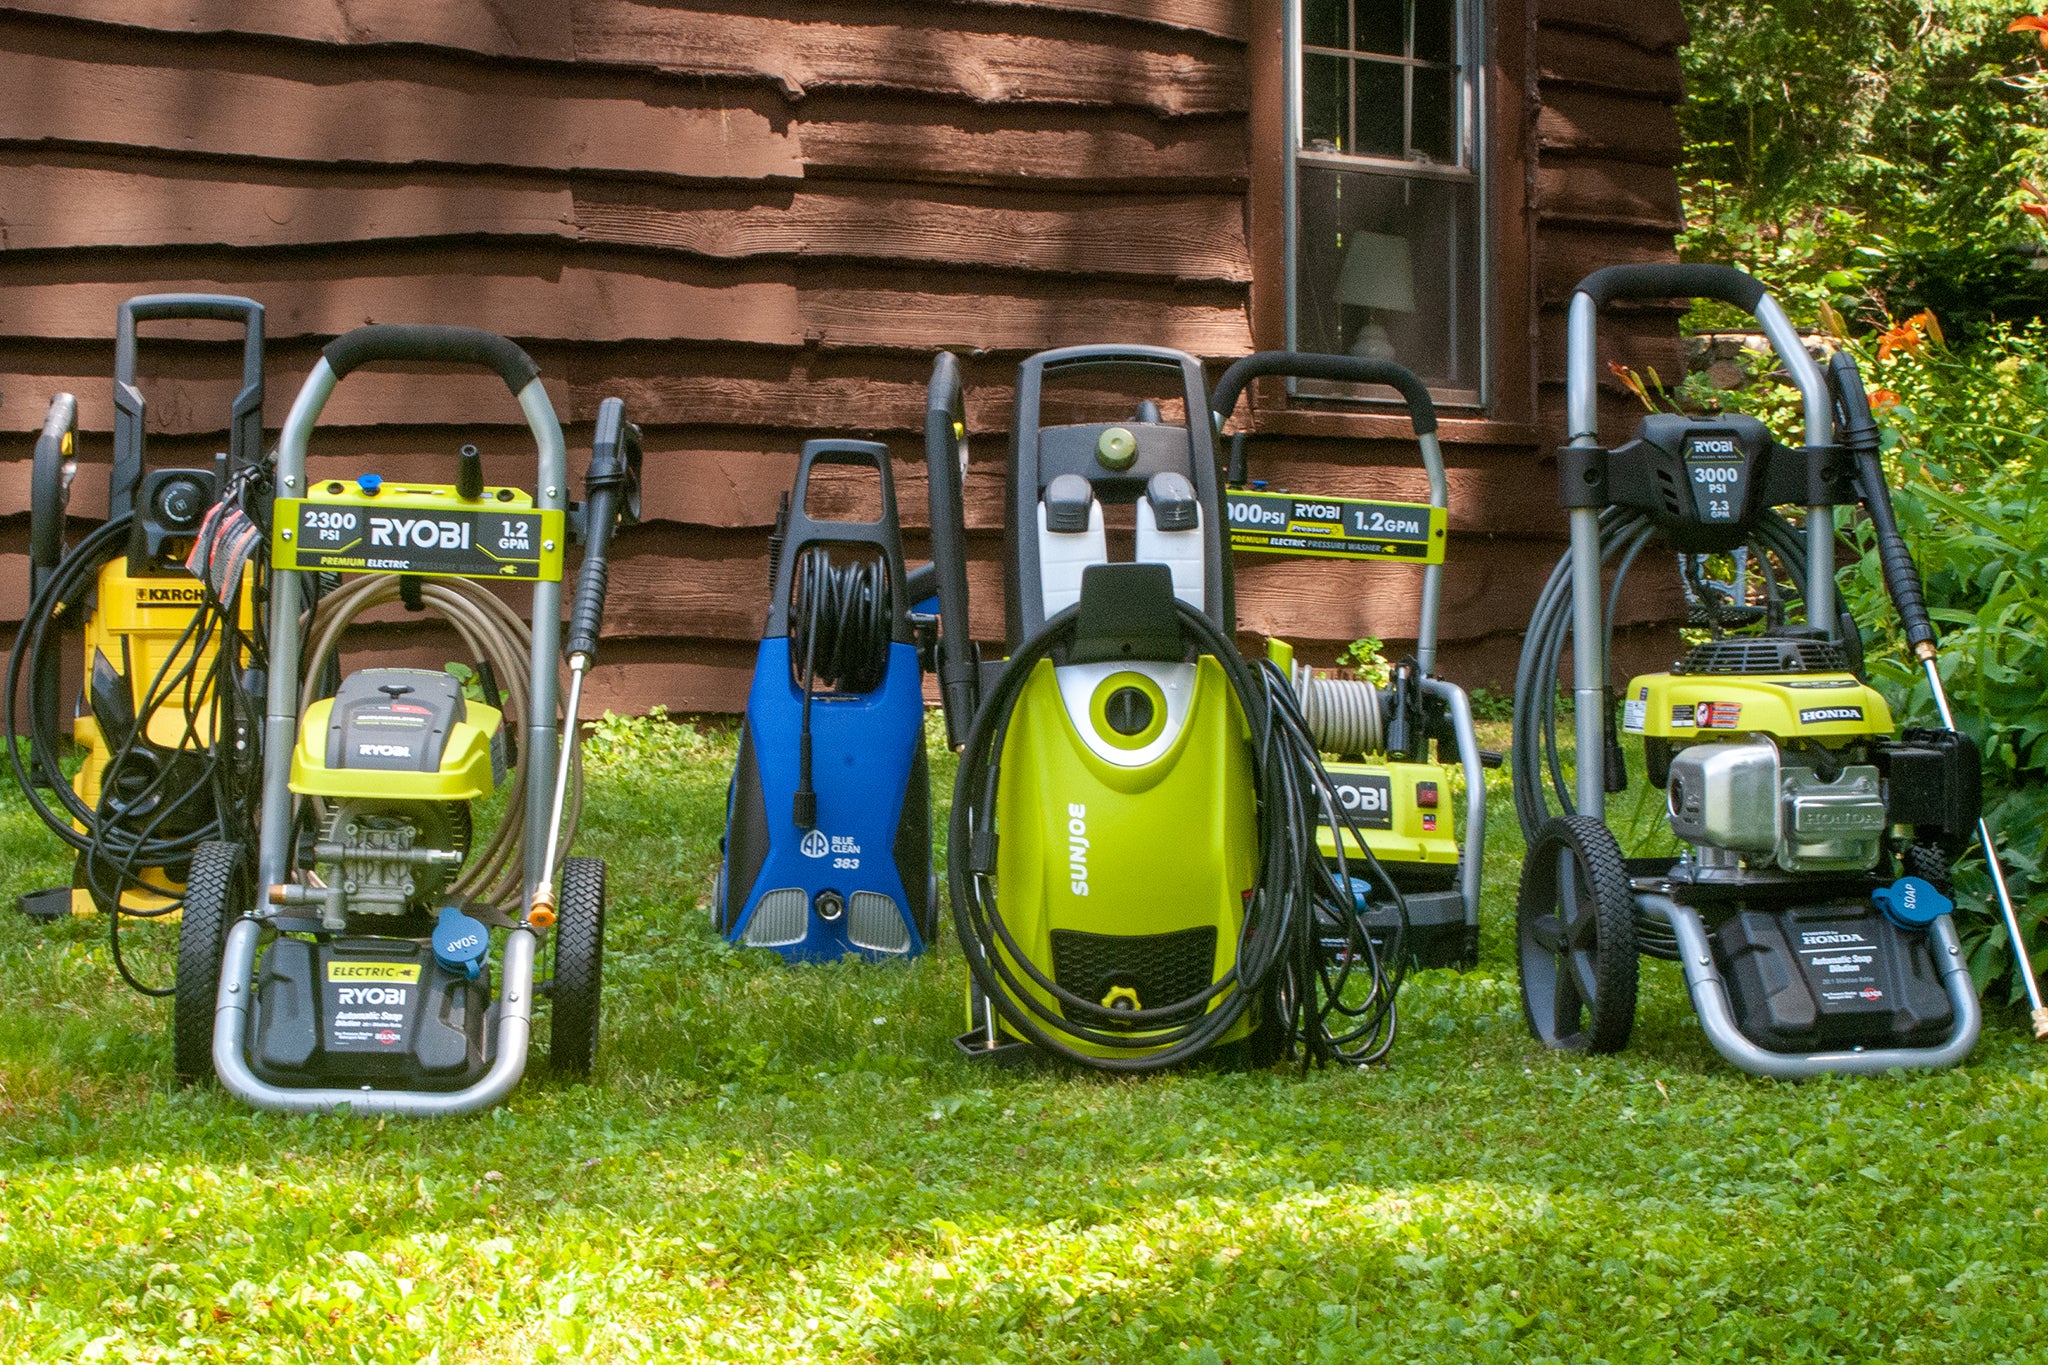 A Clear Guide to The 10 Best Electric Pressure/Power Washers in 2022